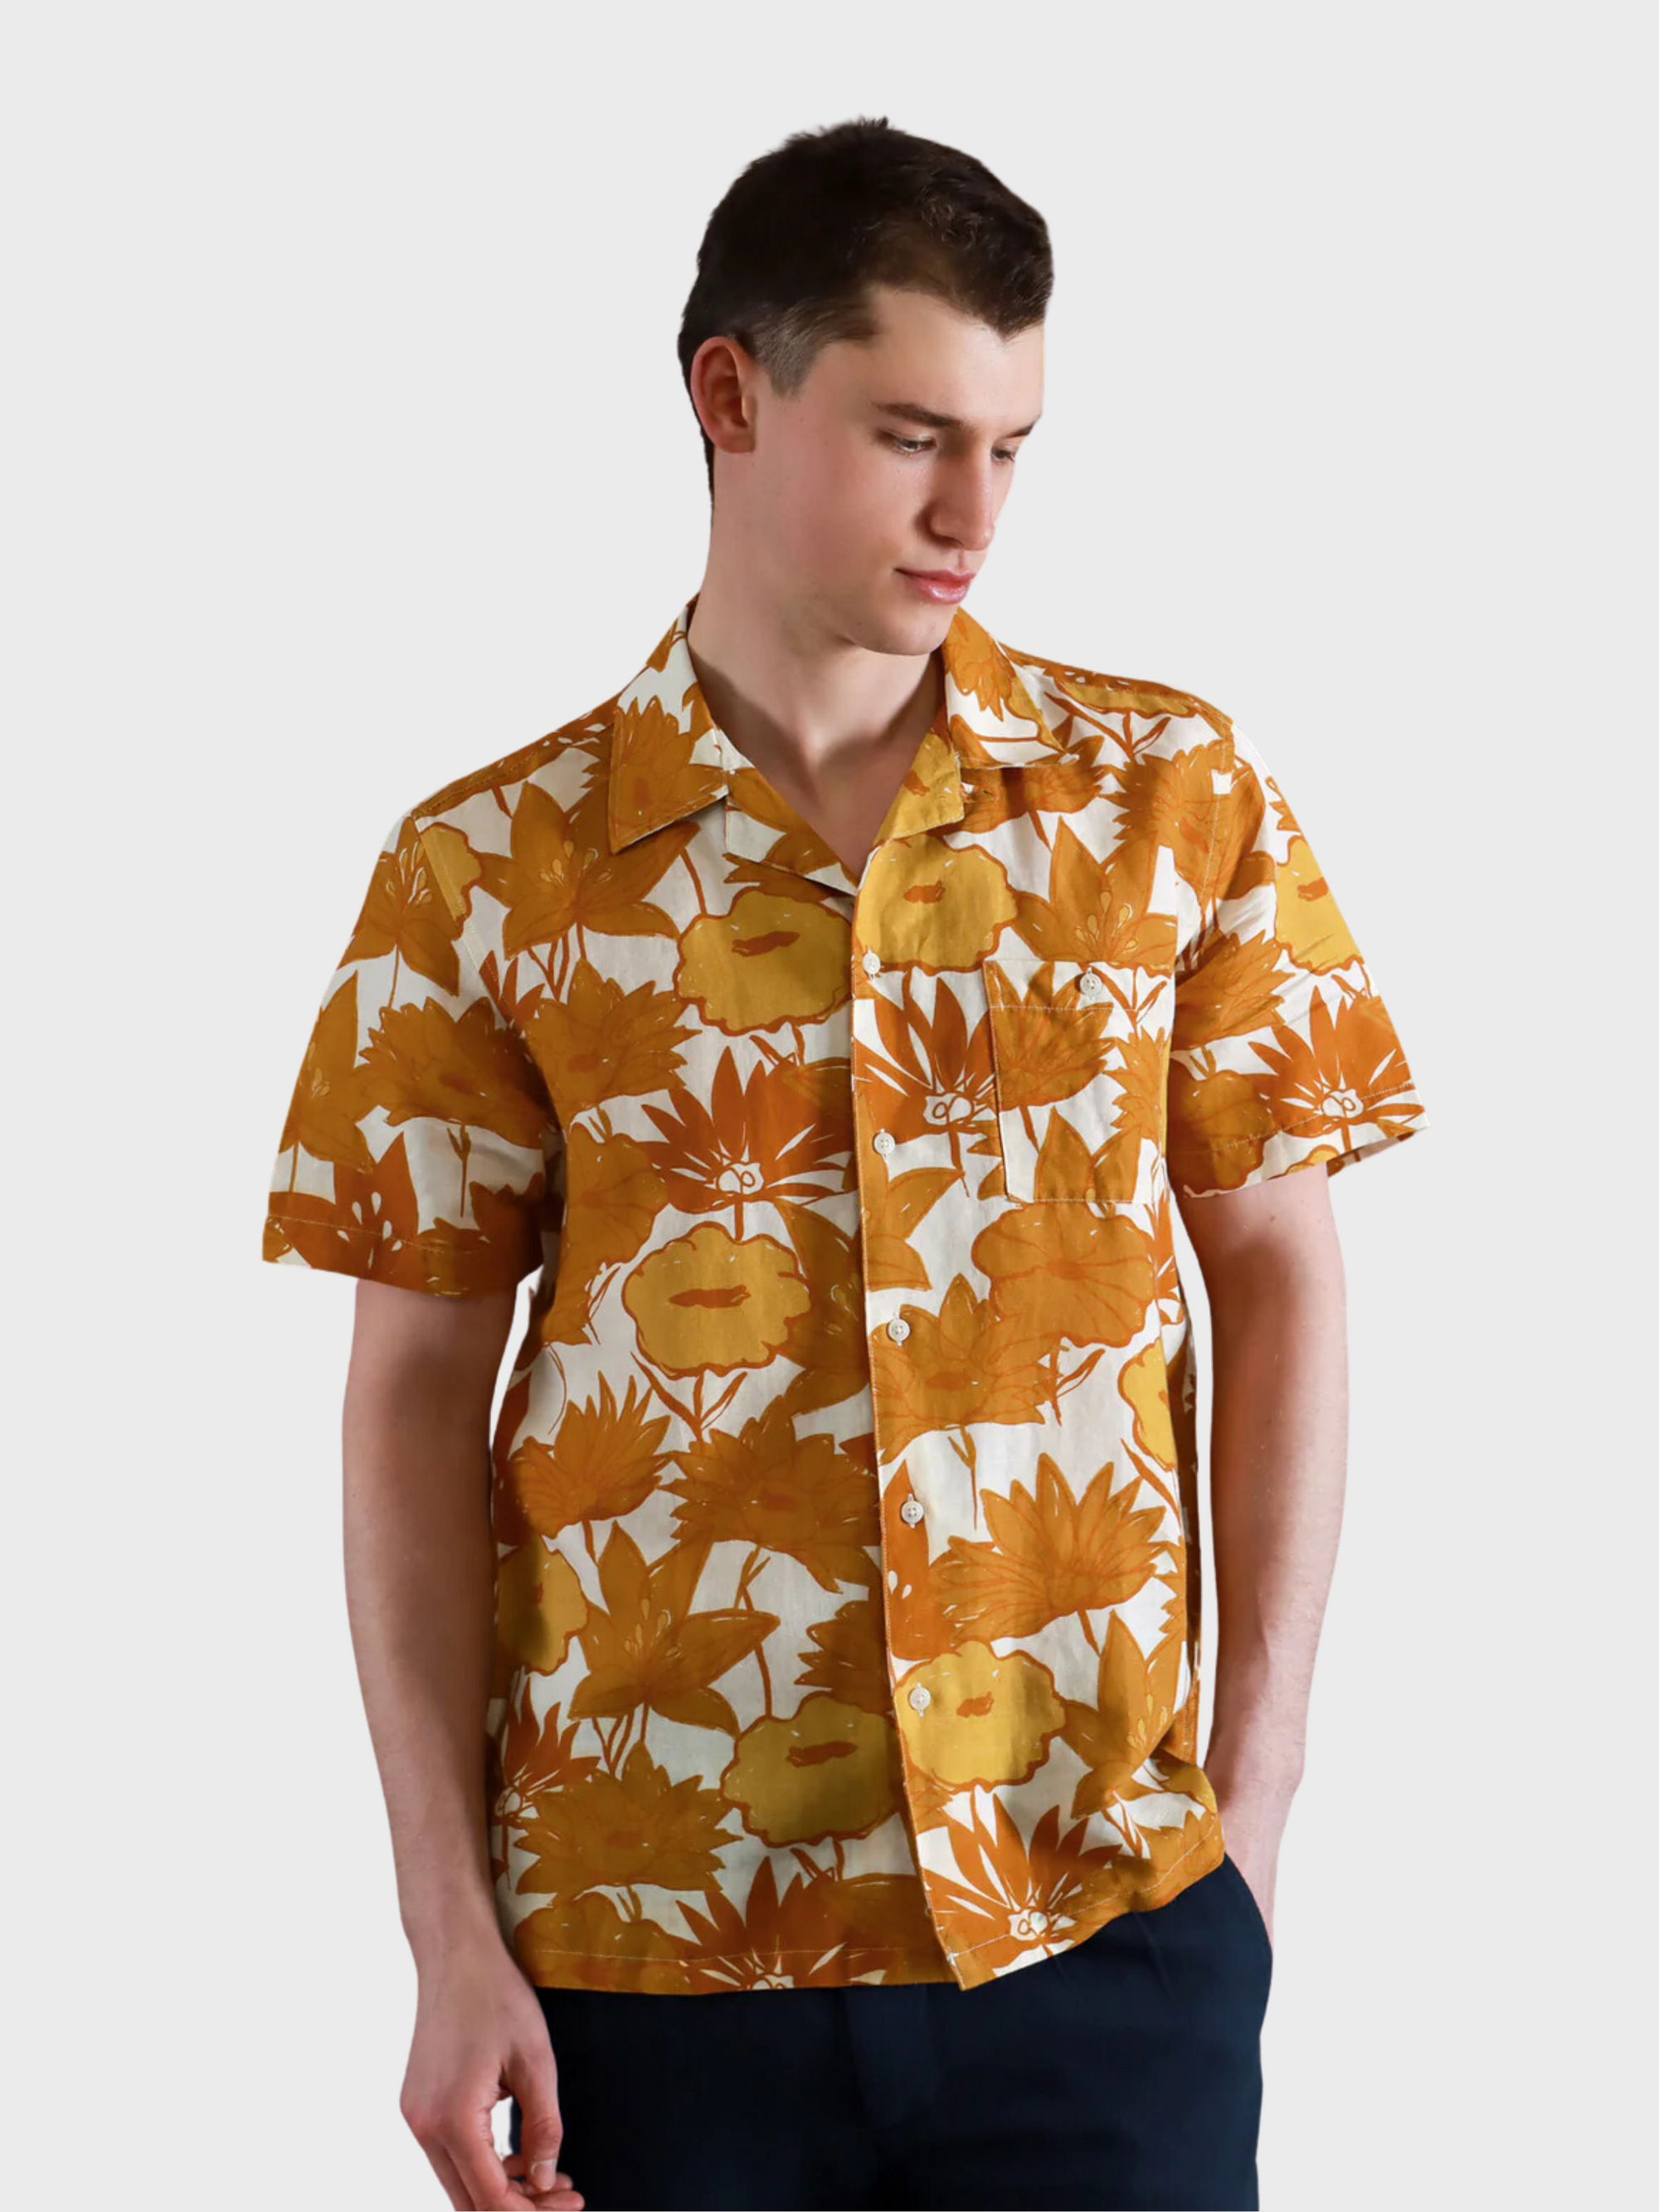 Far Afield Shirt S/S Selleck Flower Collage Honey Gold-Men's Shirts-S-Brooklyn-Vancouver-Yaletown-Canada